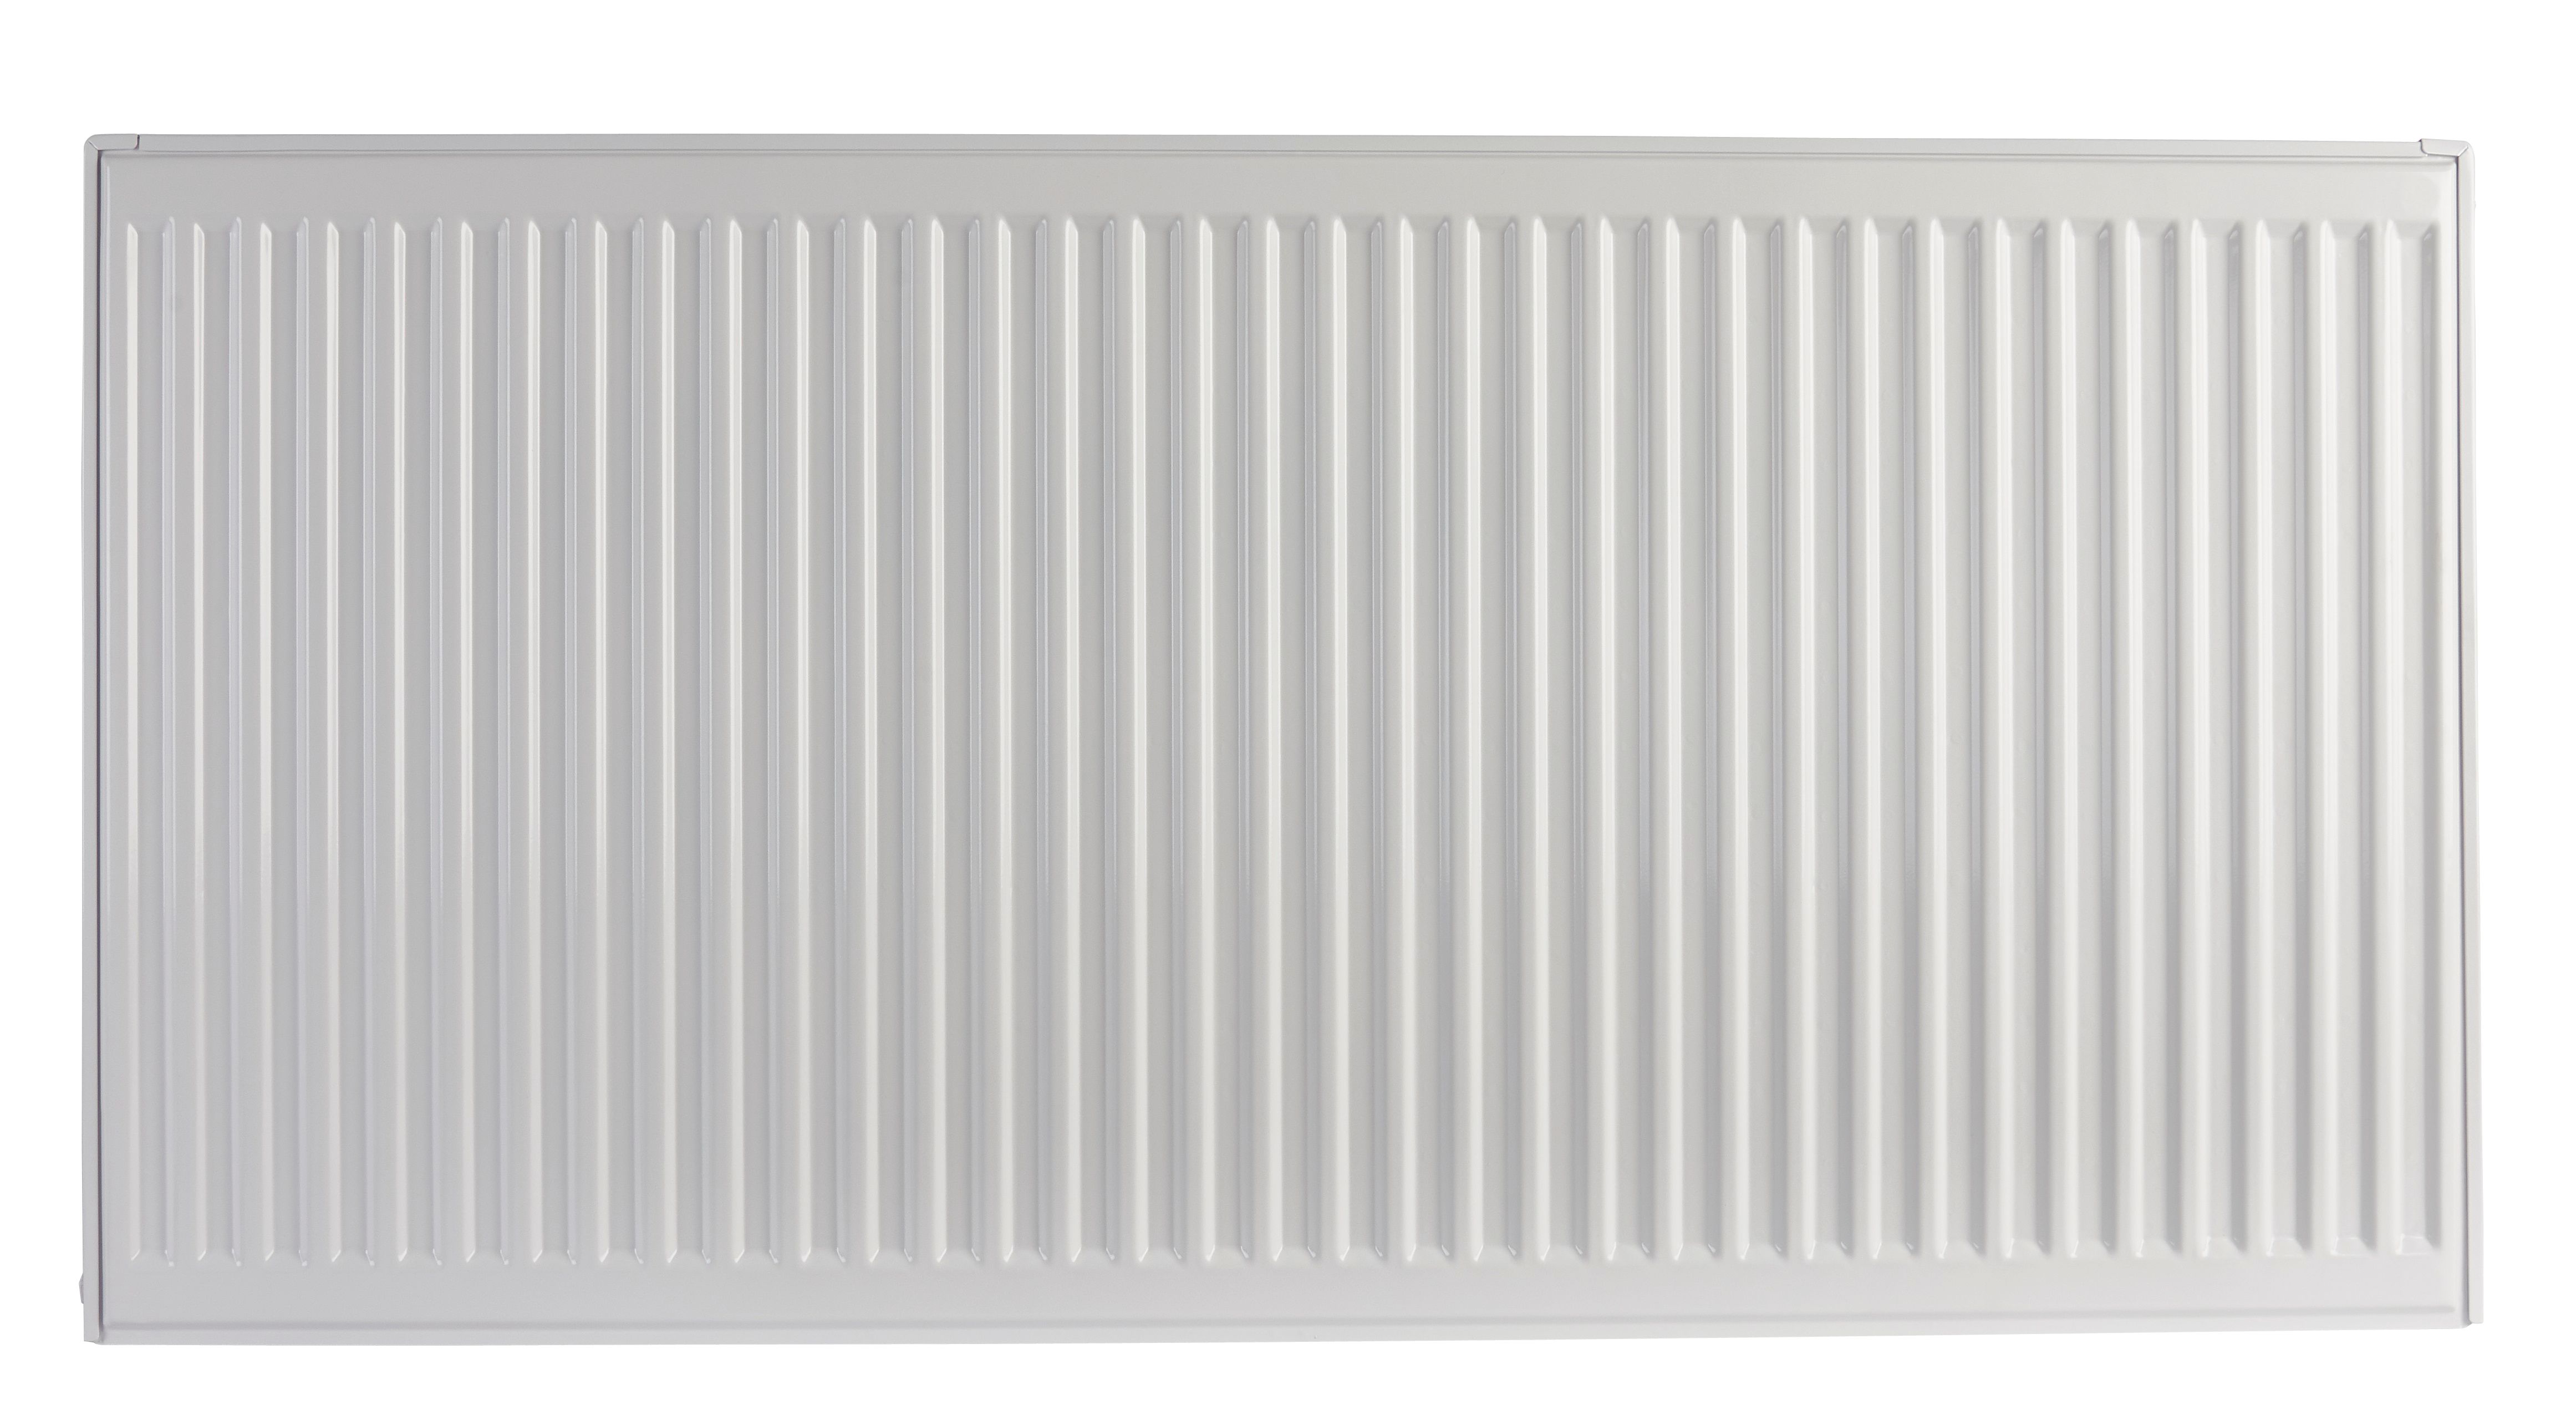 Image of Homeline by Stelrad 500 x 1000mm Type 22 Double Panel Premium Double Convector Radiator